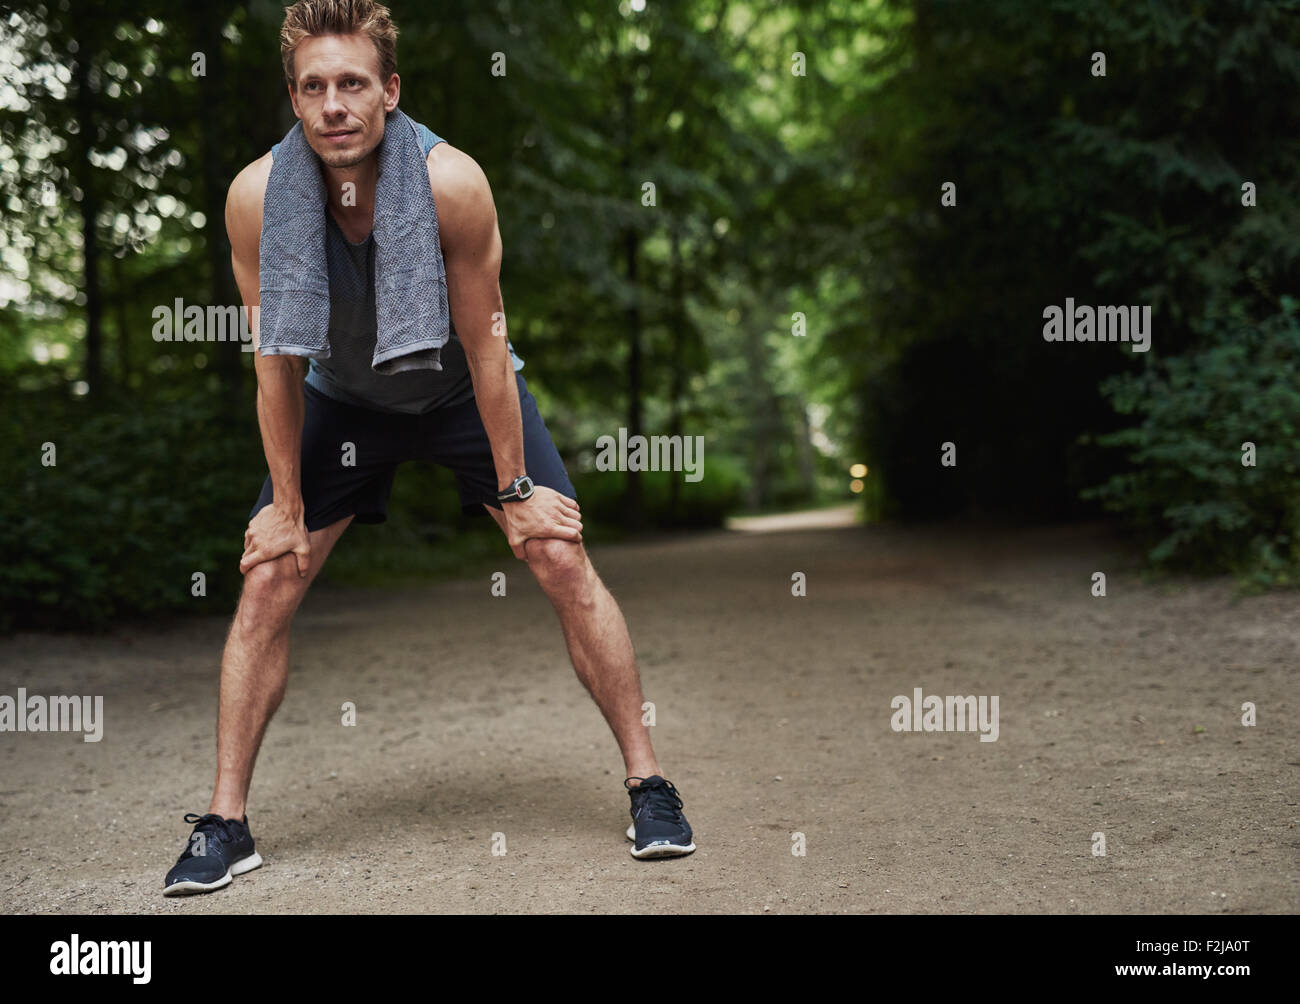 Fit Young Man Holding his Knees While Resting After a Running Exercise at the Park. Stock Photo